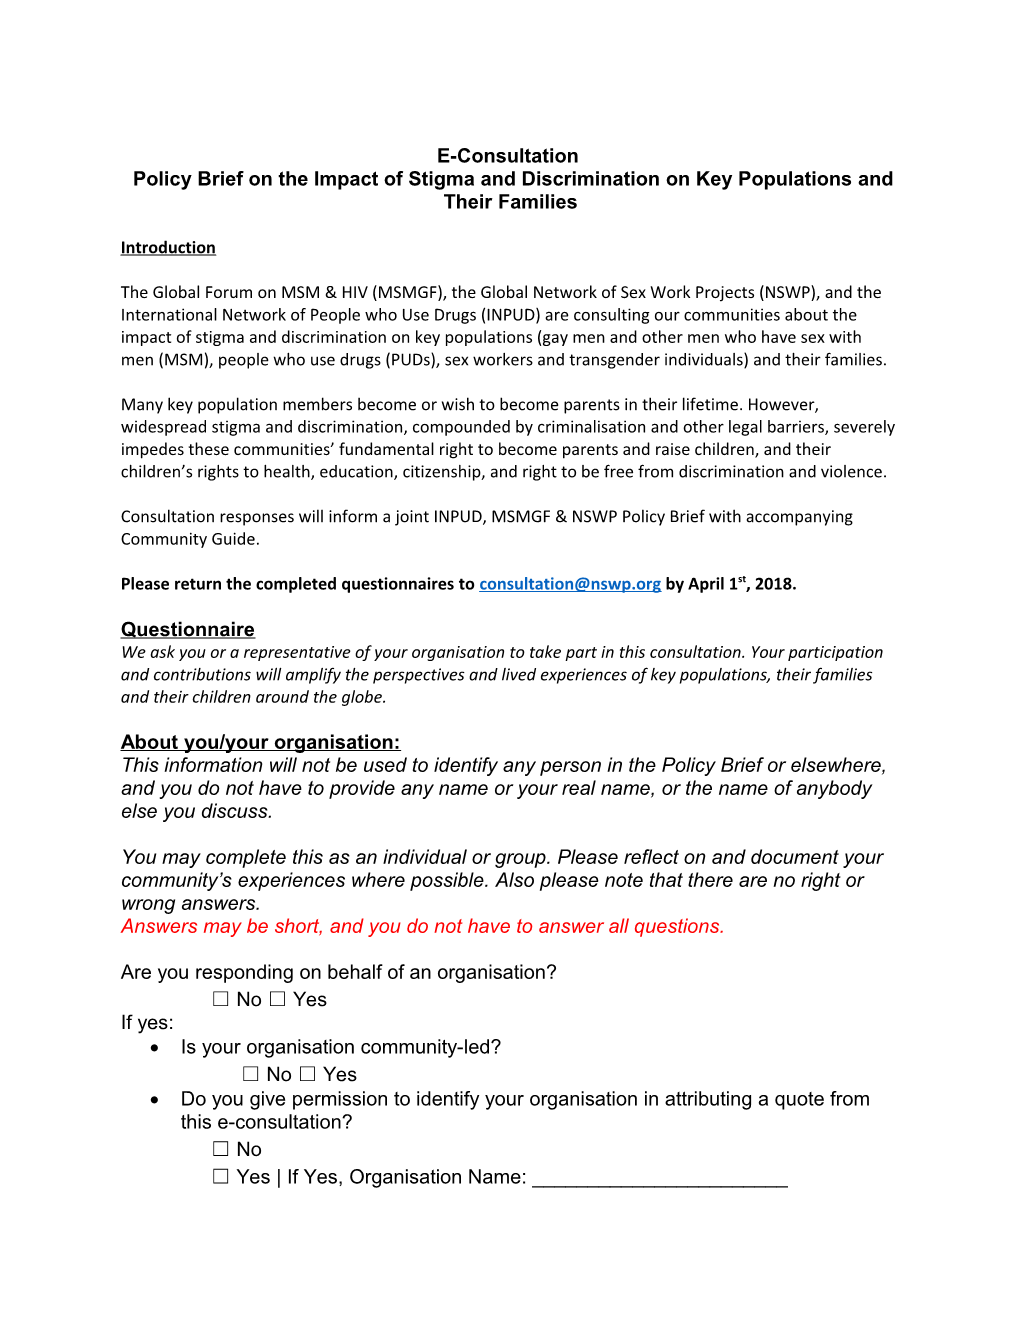 Policy Brief on the Impact of Stigma and Discrimination Onkey Populations and Their Families